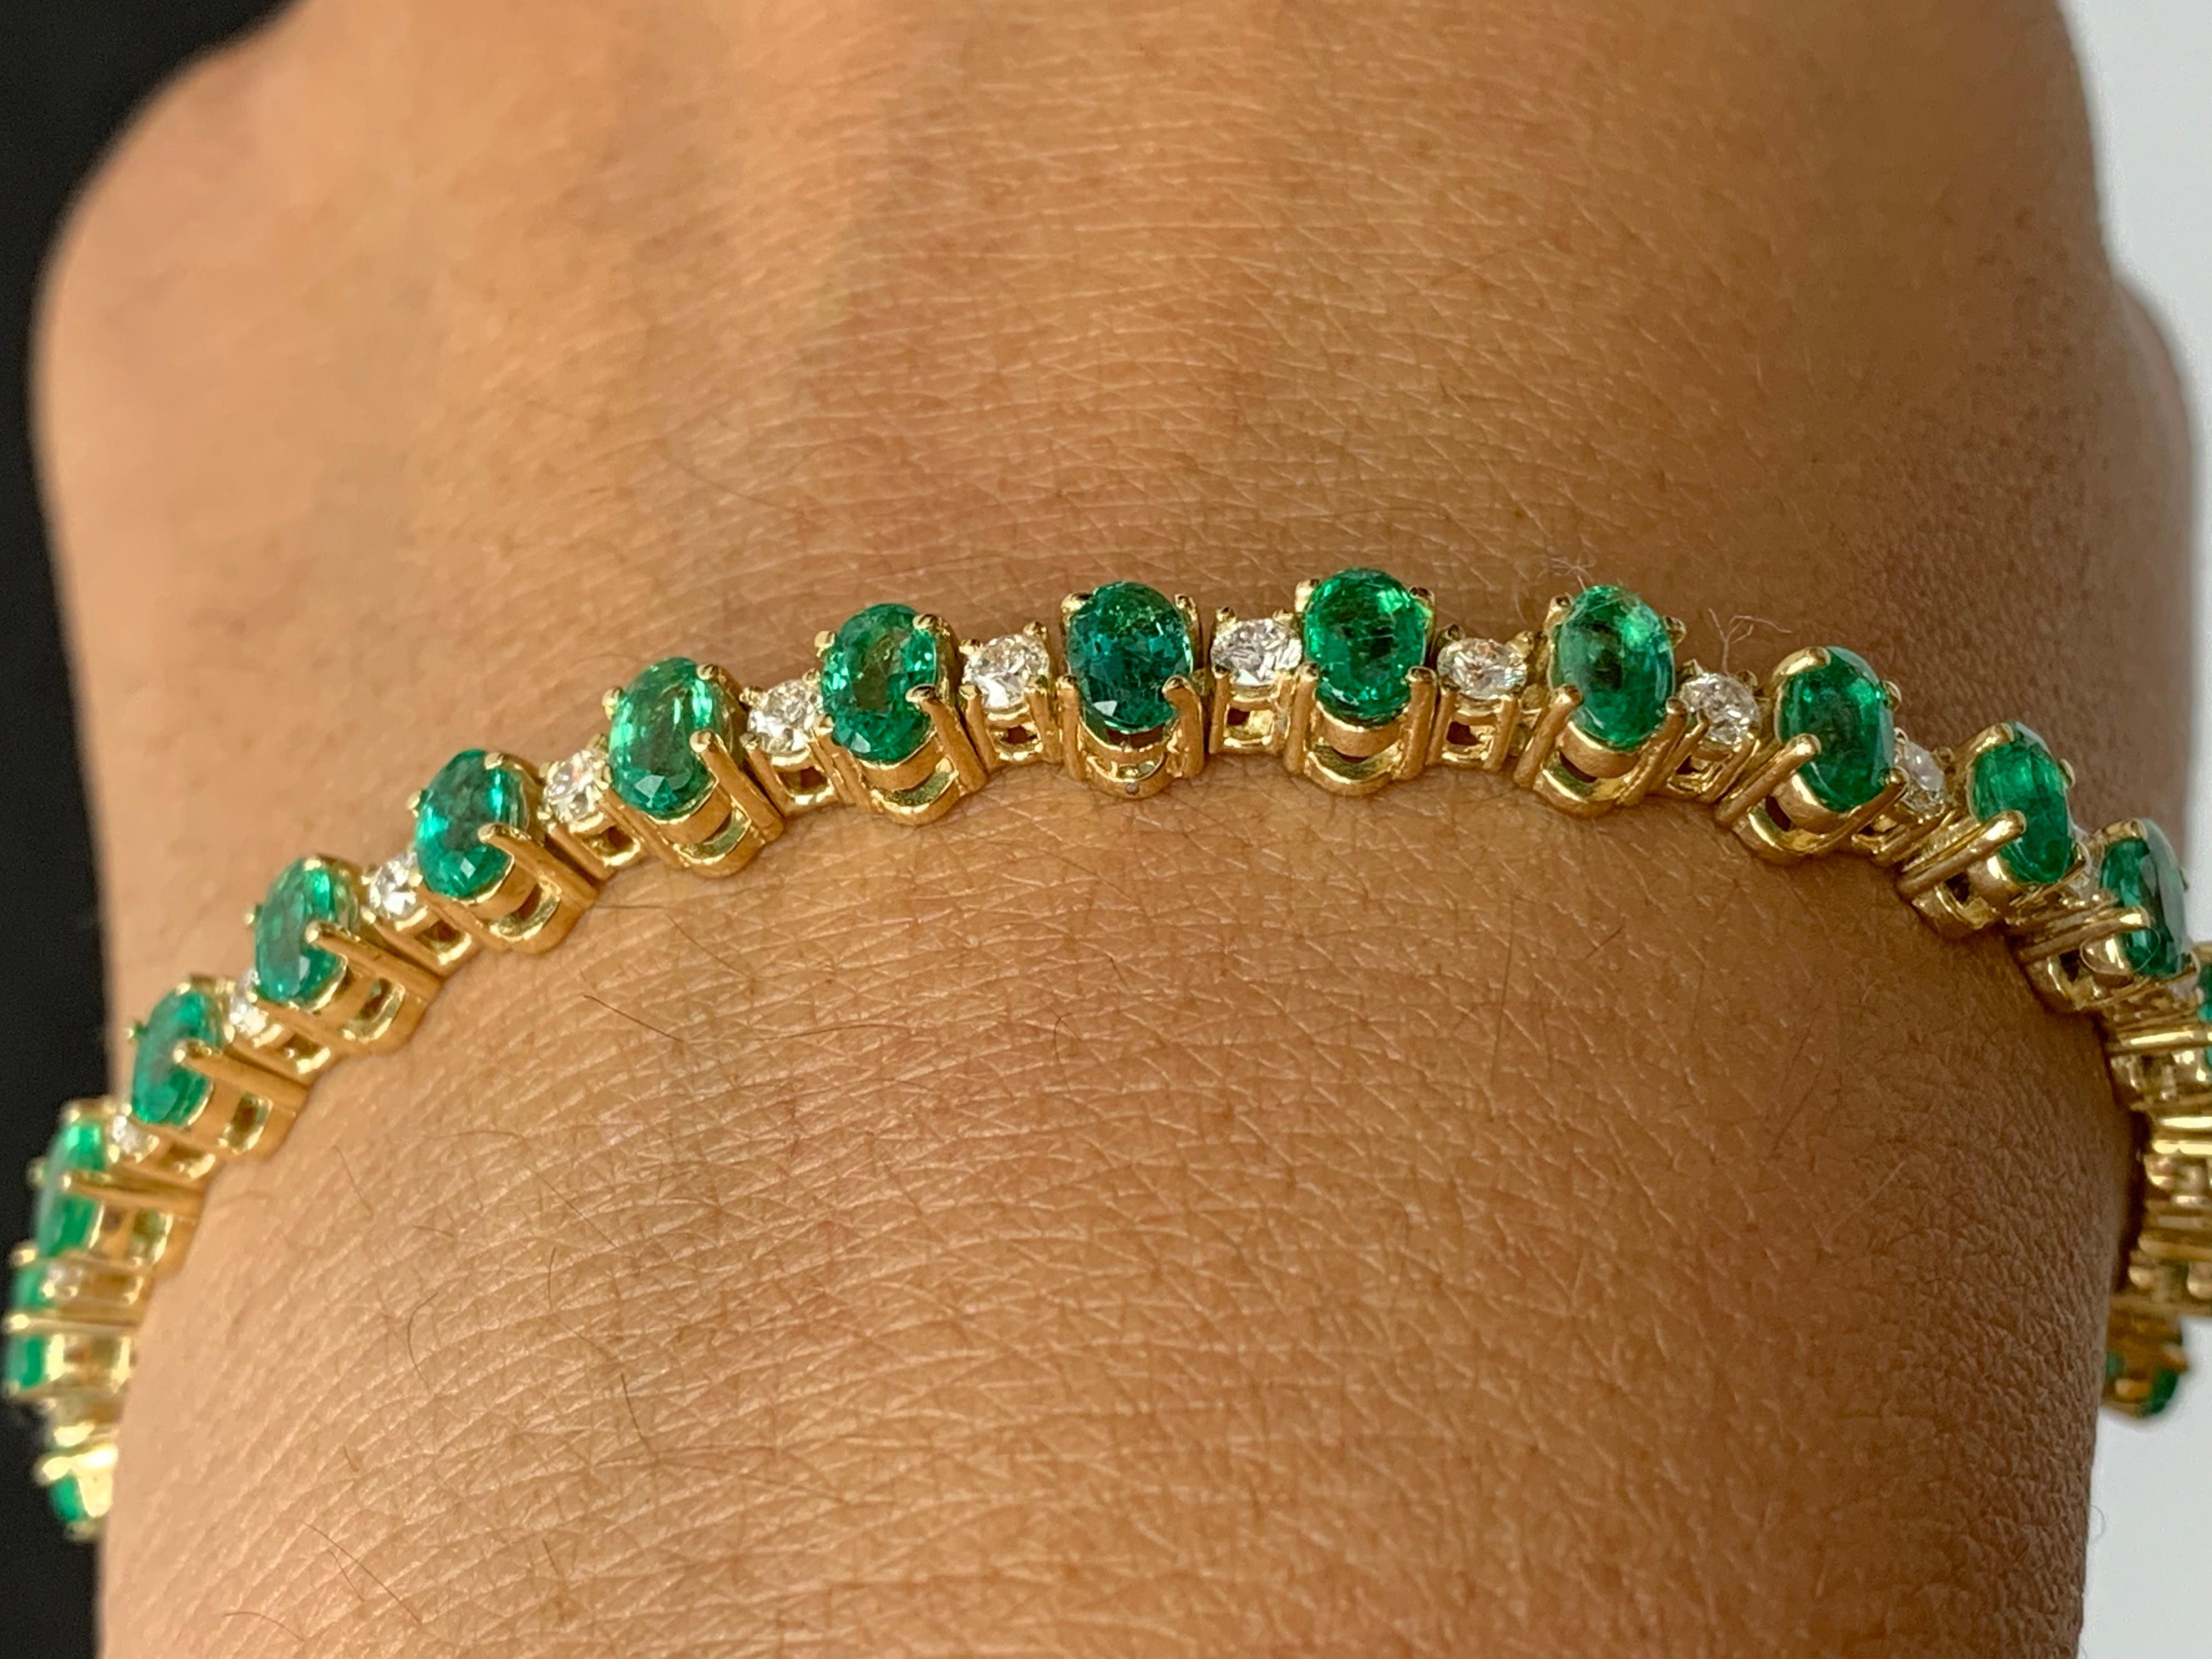 Grandeur 6.30 Carats Oval Cut Emeralds and Diamond Bracelet in 14k Yellow Gold For Sale 2